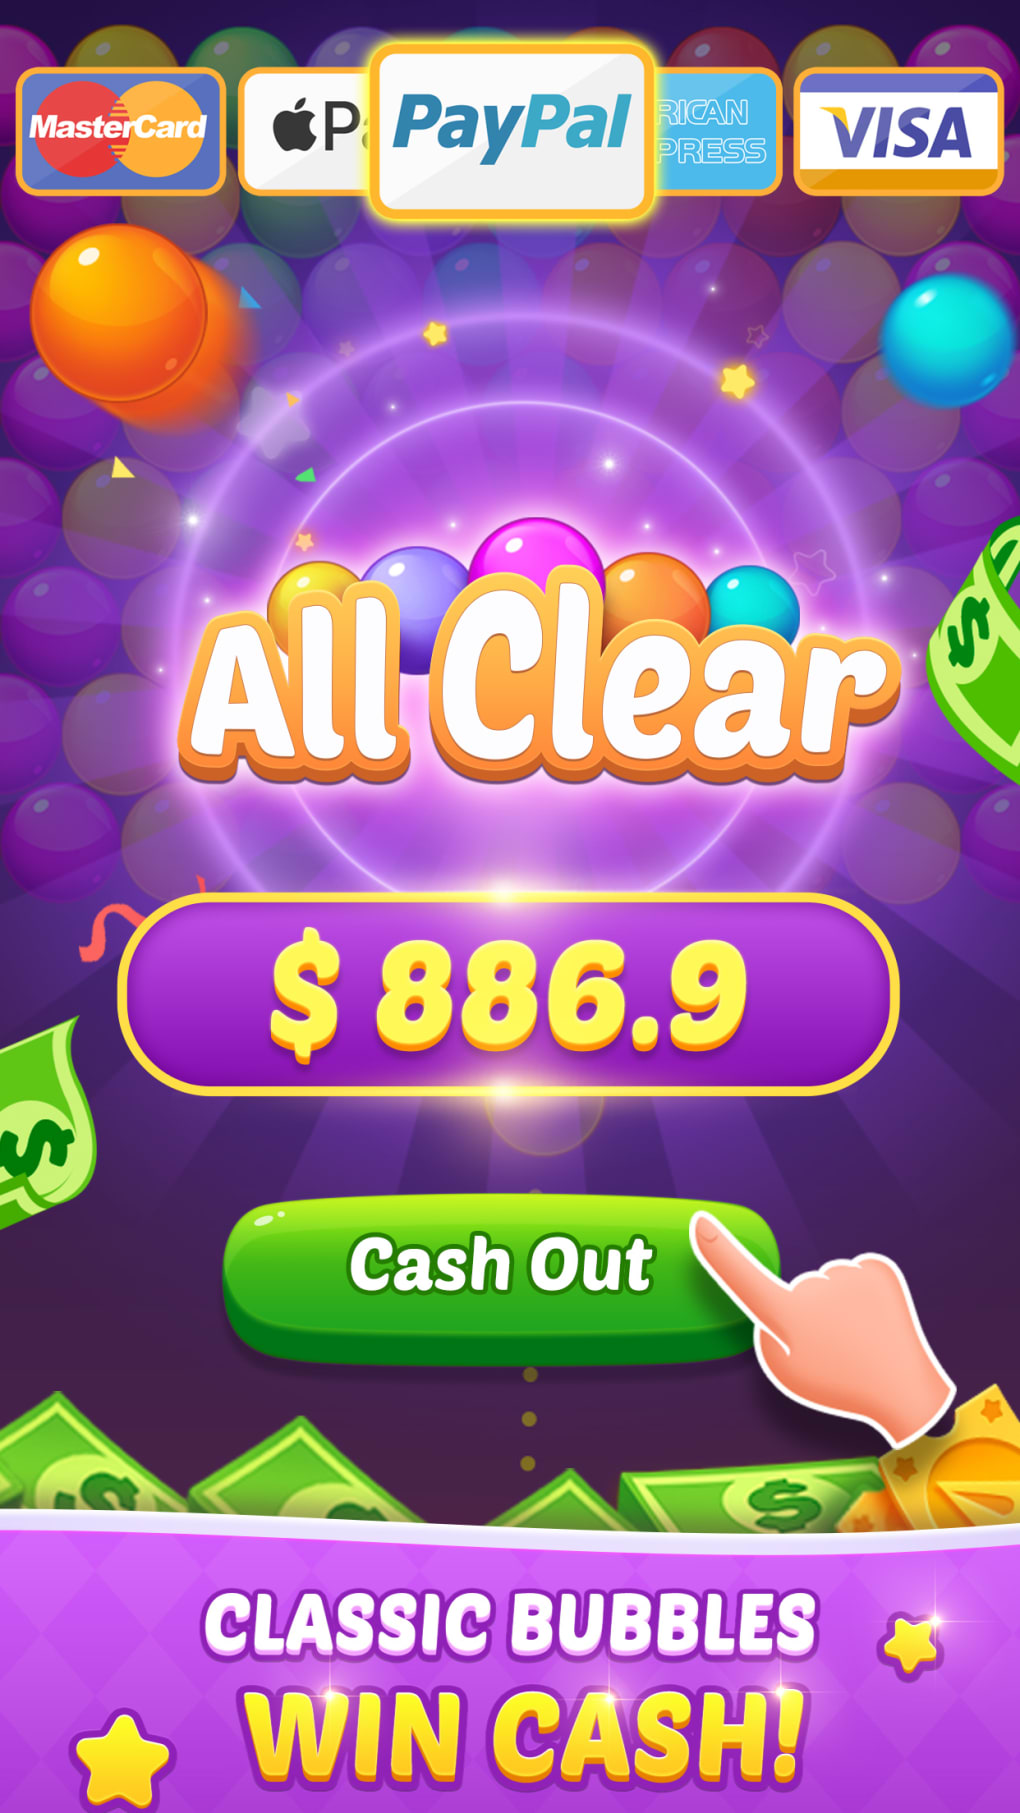 Bubble-Buzz Win Real Cash guia for Android - Free App Download